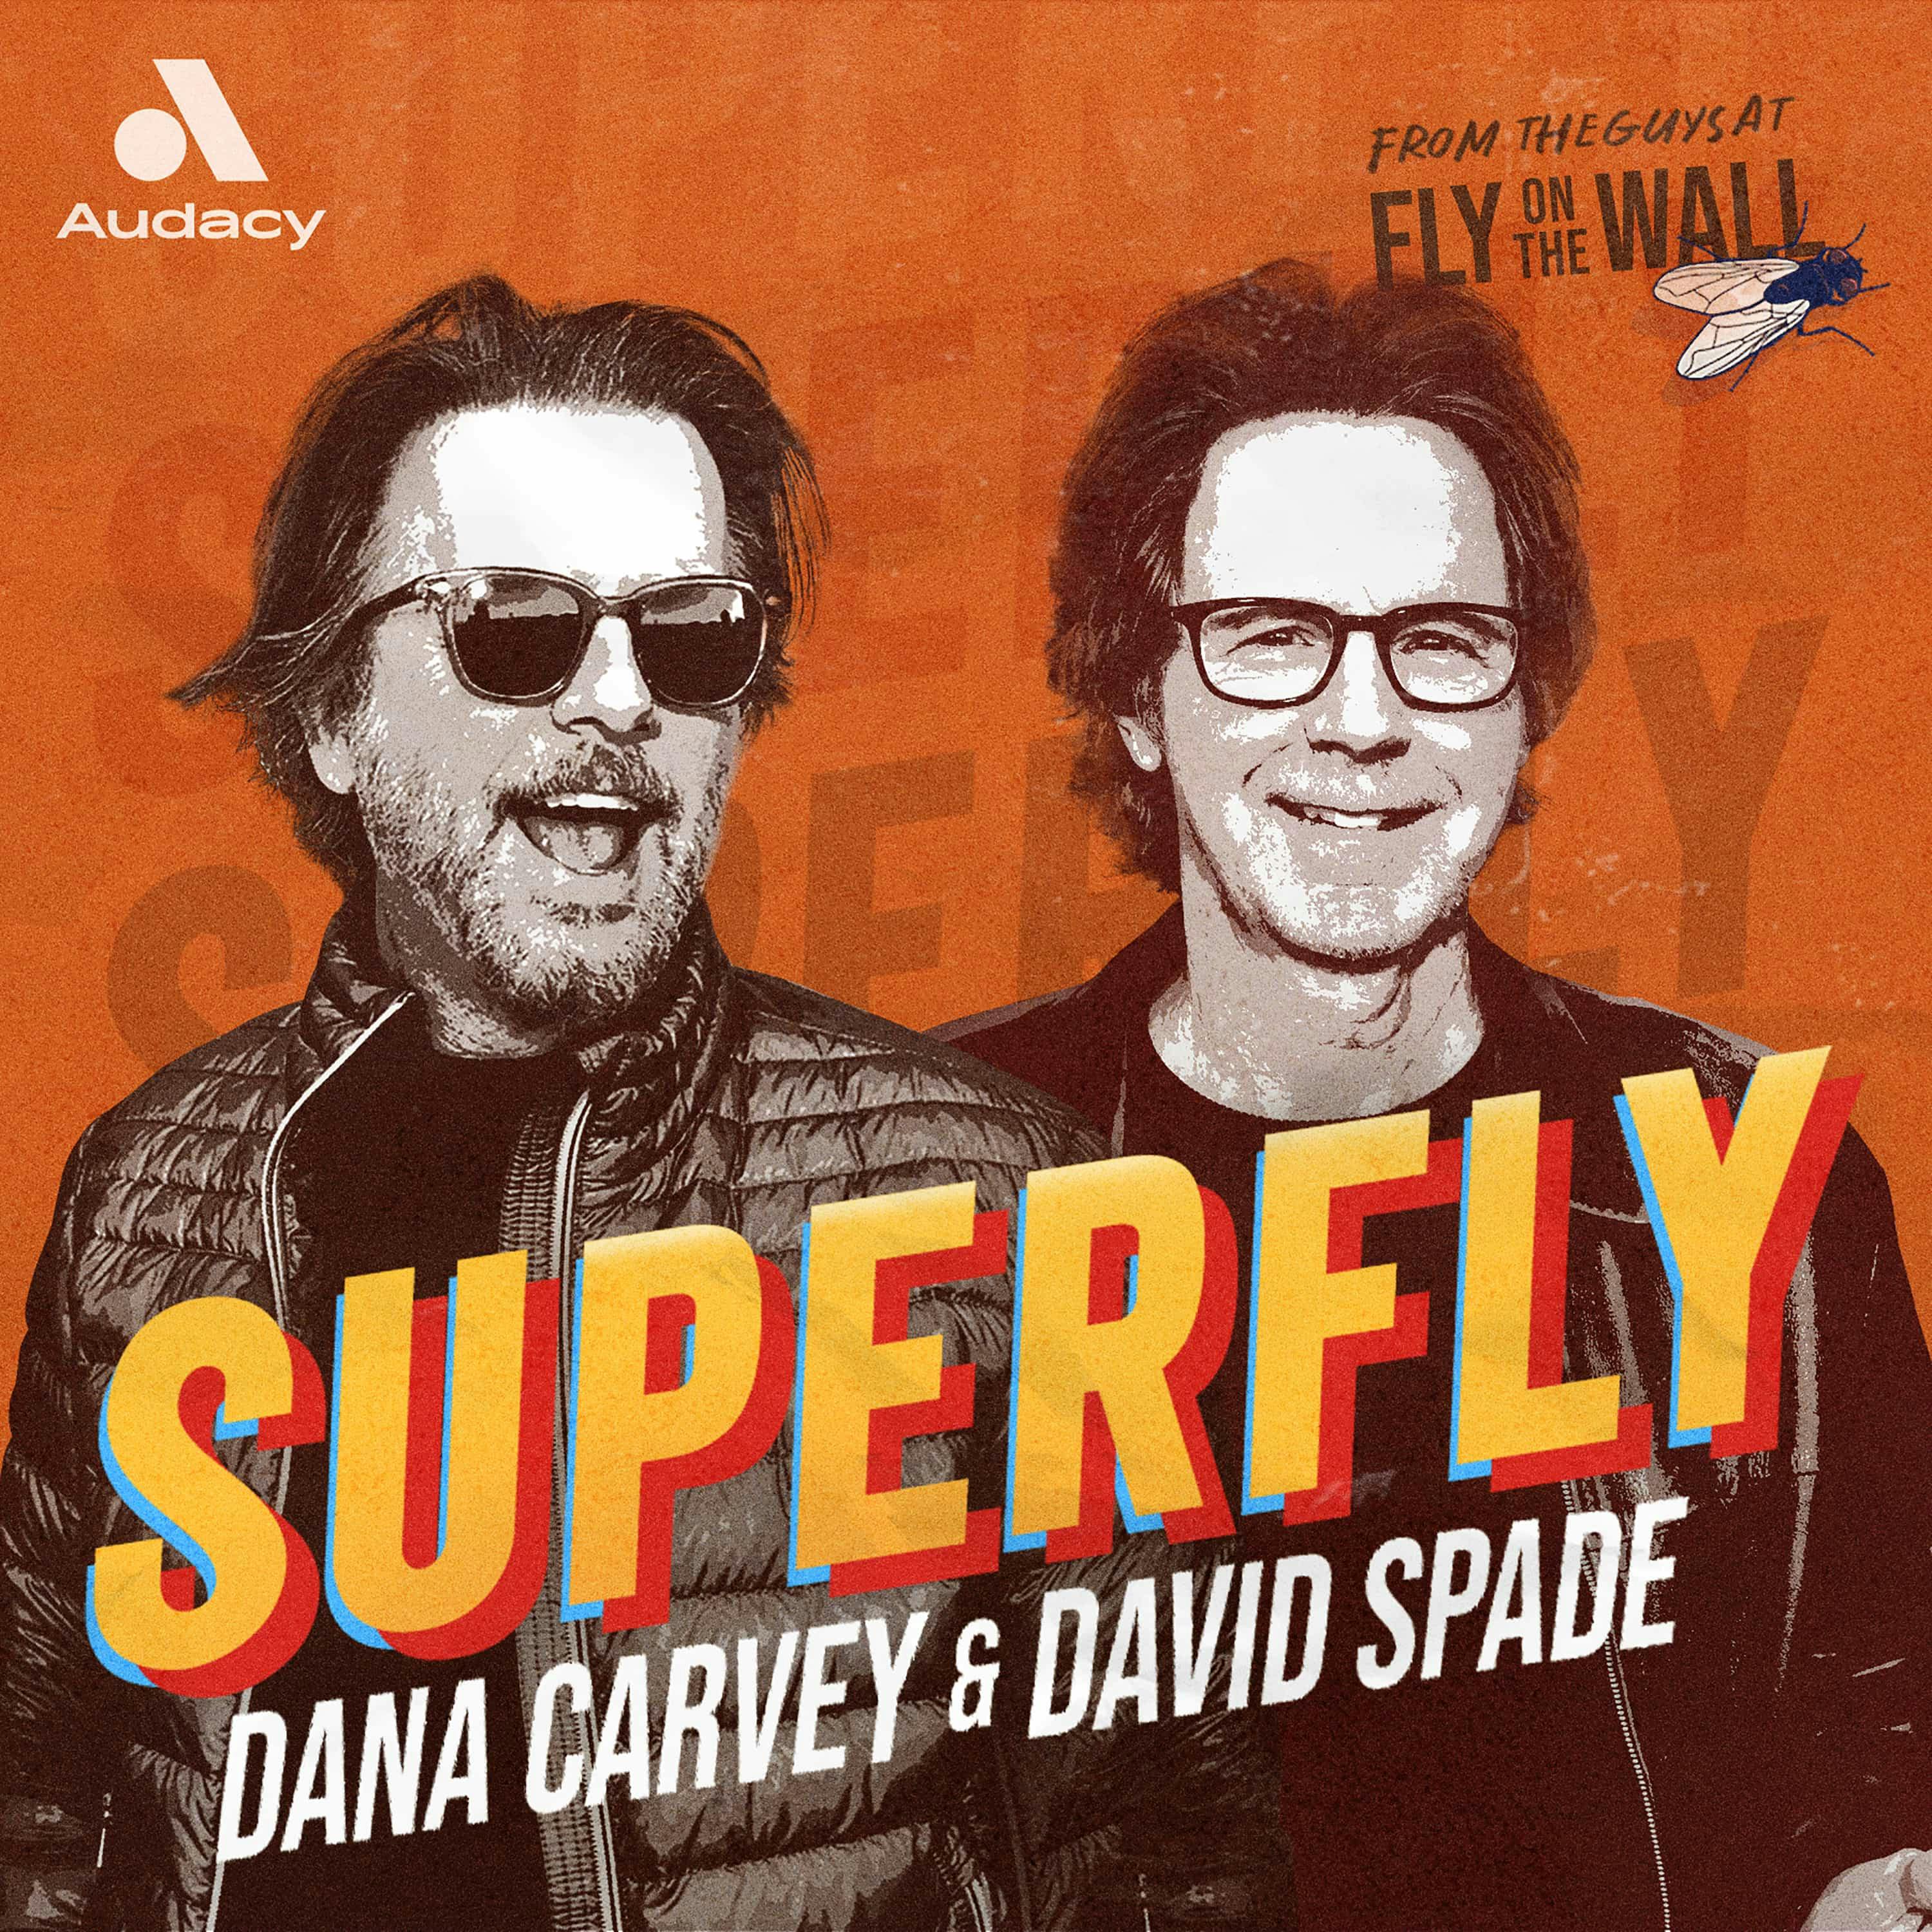 TCB Introducing:  Superfly with Dana Carvey and David Spade